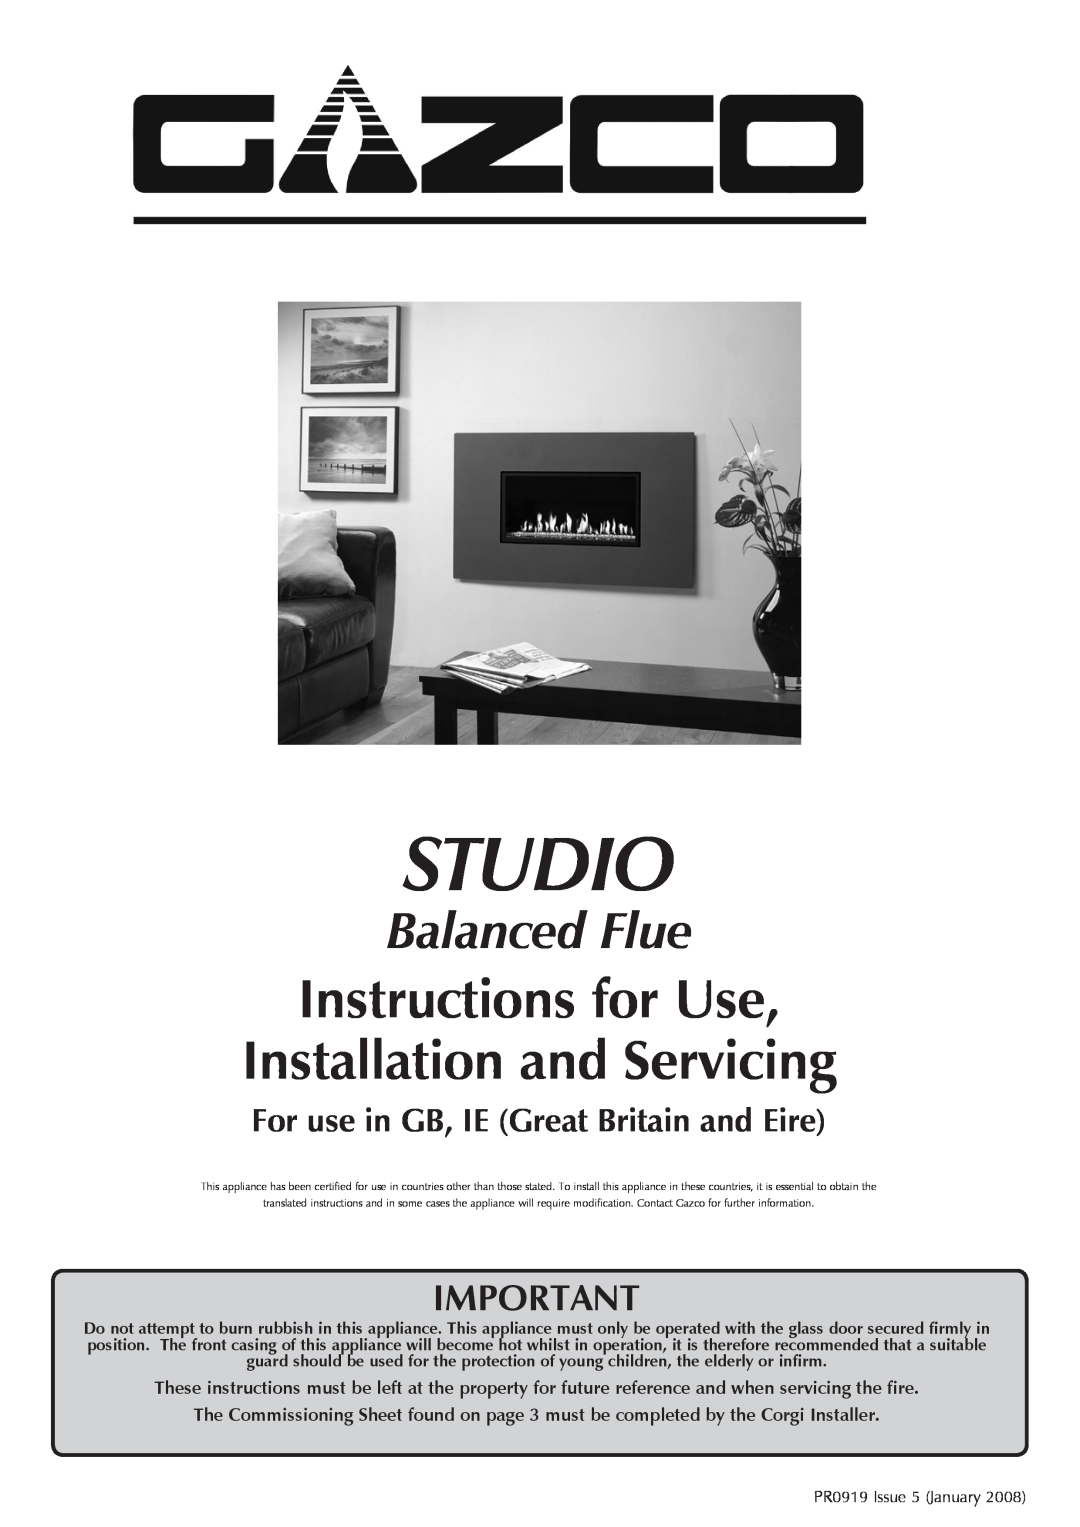 Stovax PR0919 manual Studio, Instructions for Use Installation and Servicing, Balanced Flue 